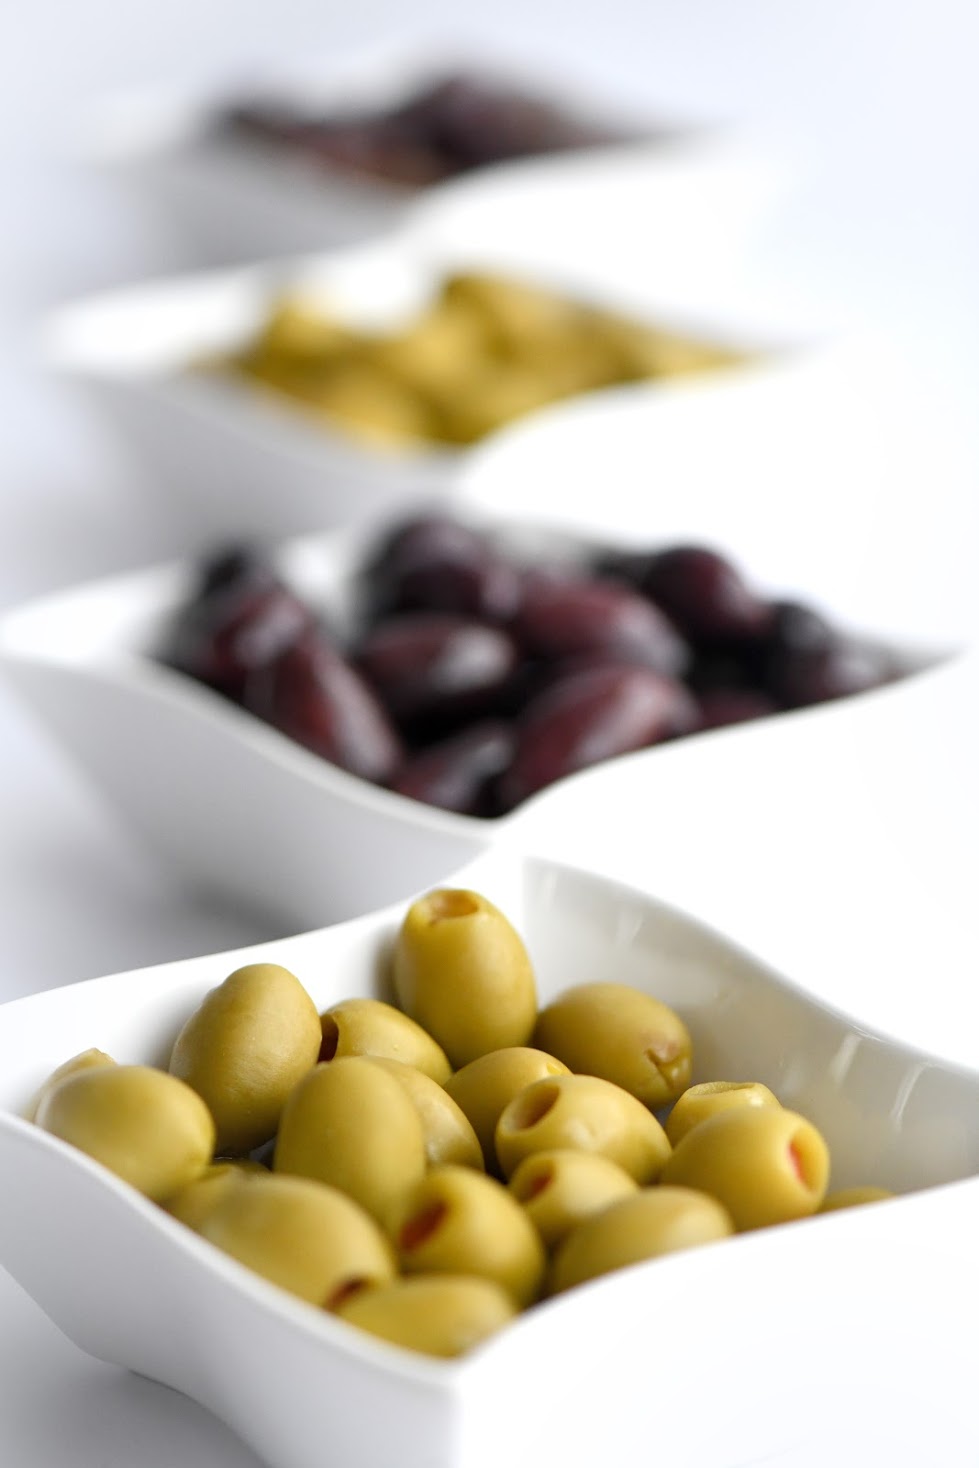 Green Olives Pitted